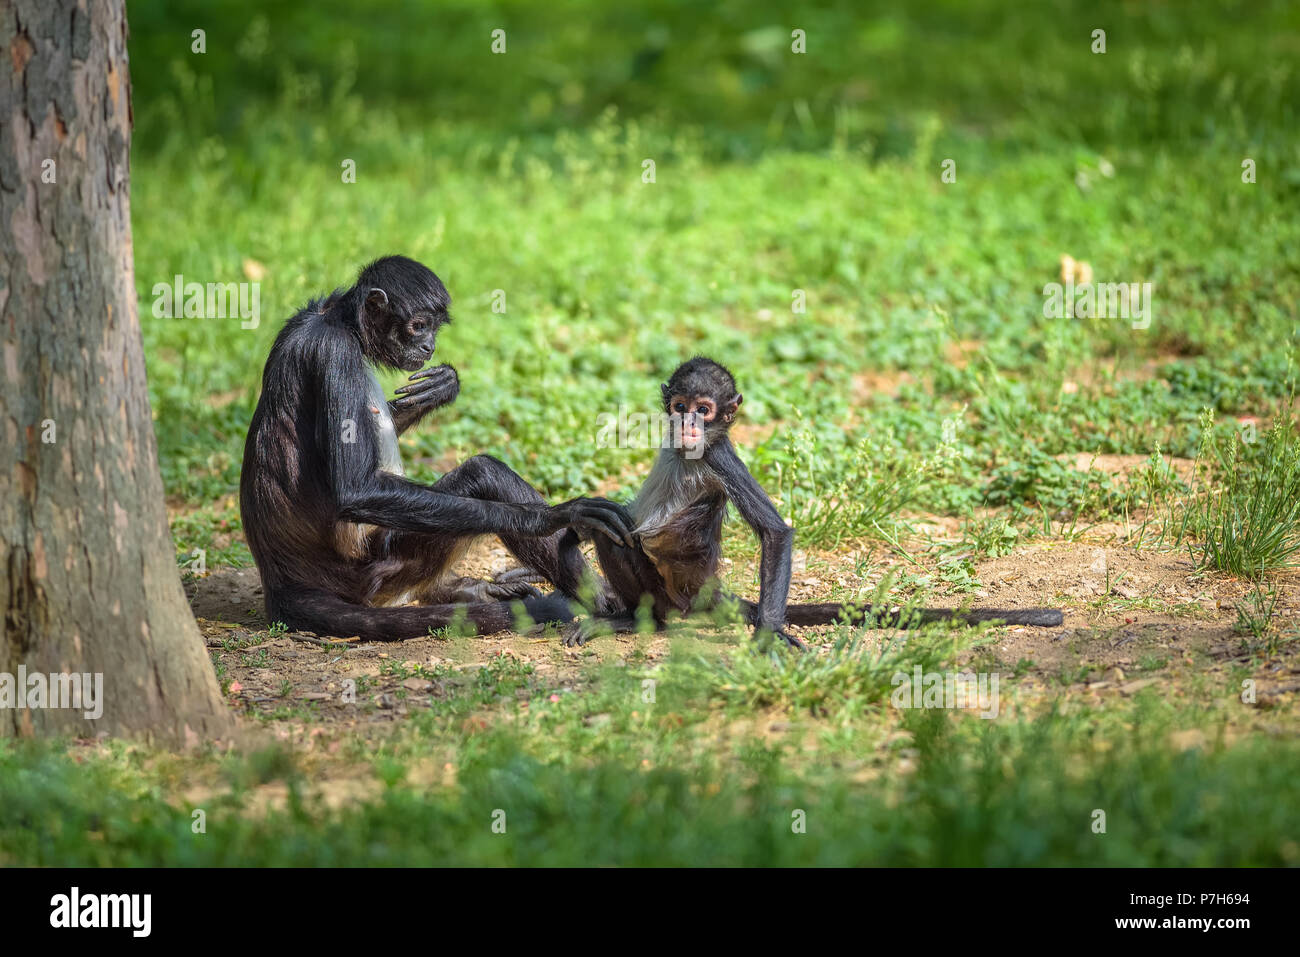 Geoffroy's Spider Monkey and its baby. This primate is also referred to as black-handed spider monkey or Ateles geoffroyi. Stock Photo